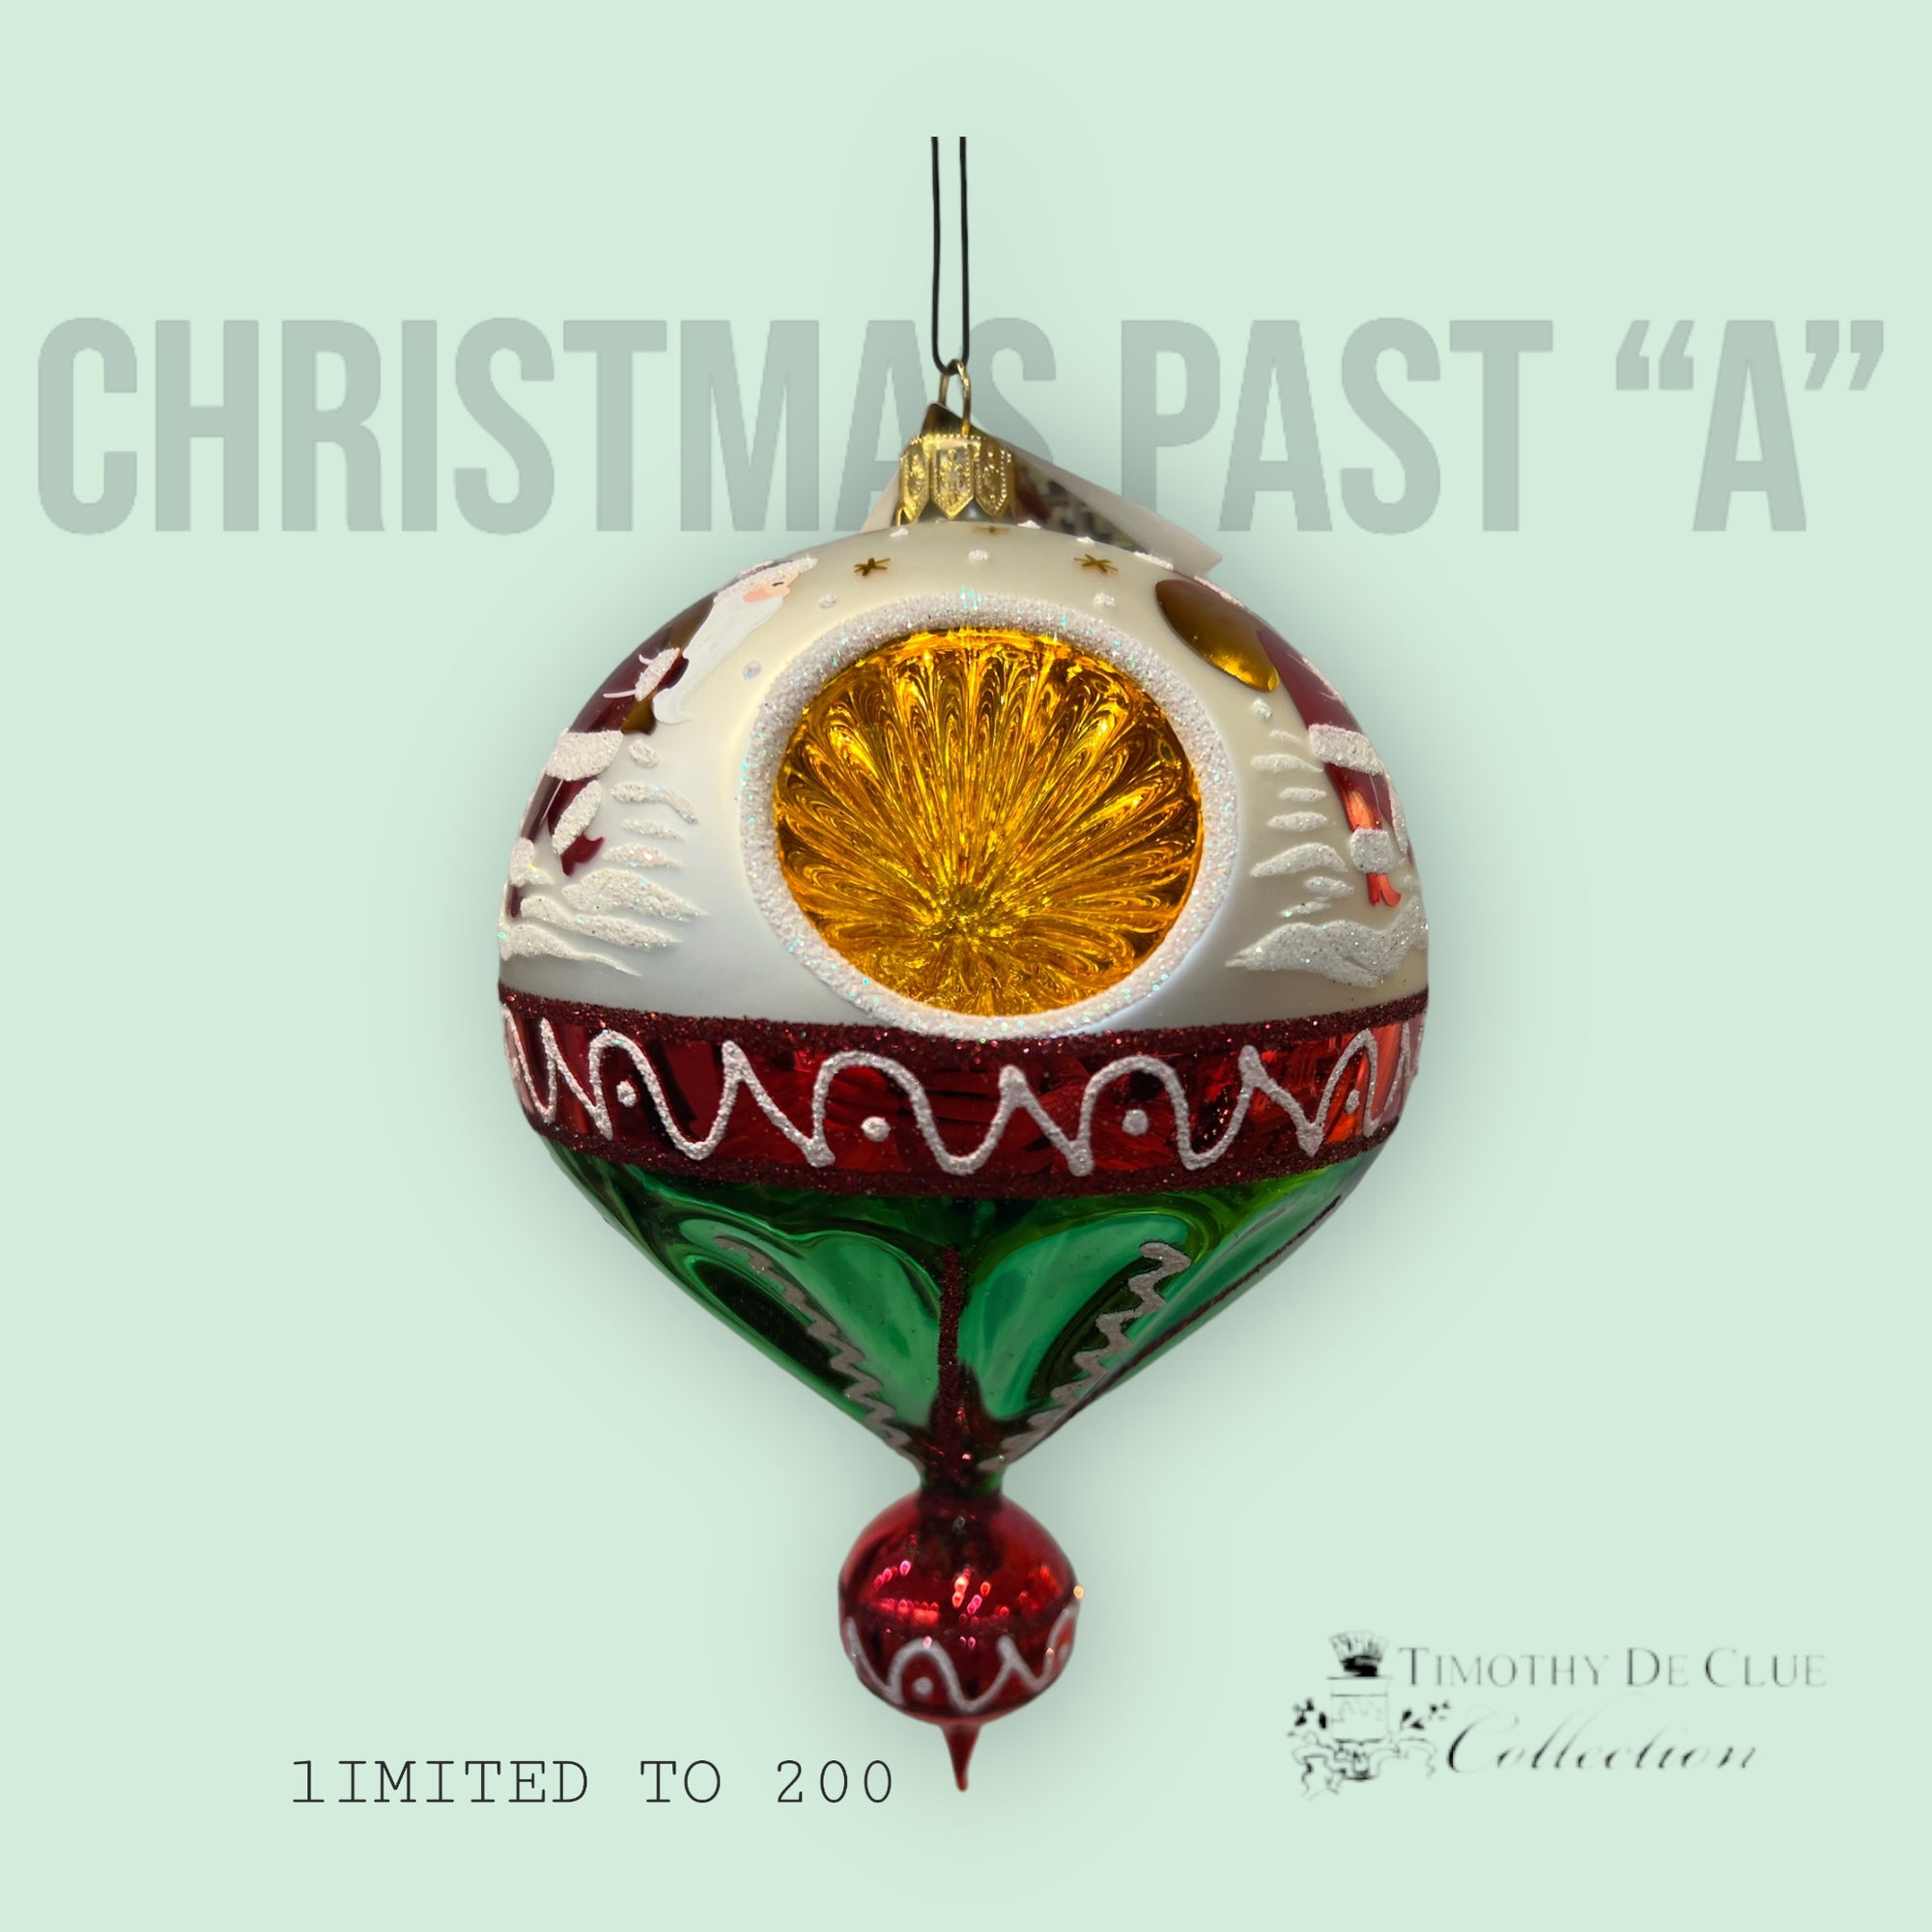 Heartfully Yours "Christmas Past A 2023" 22133 Ornament by Artist Christopher Radko